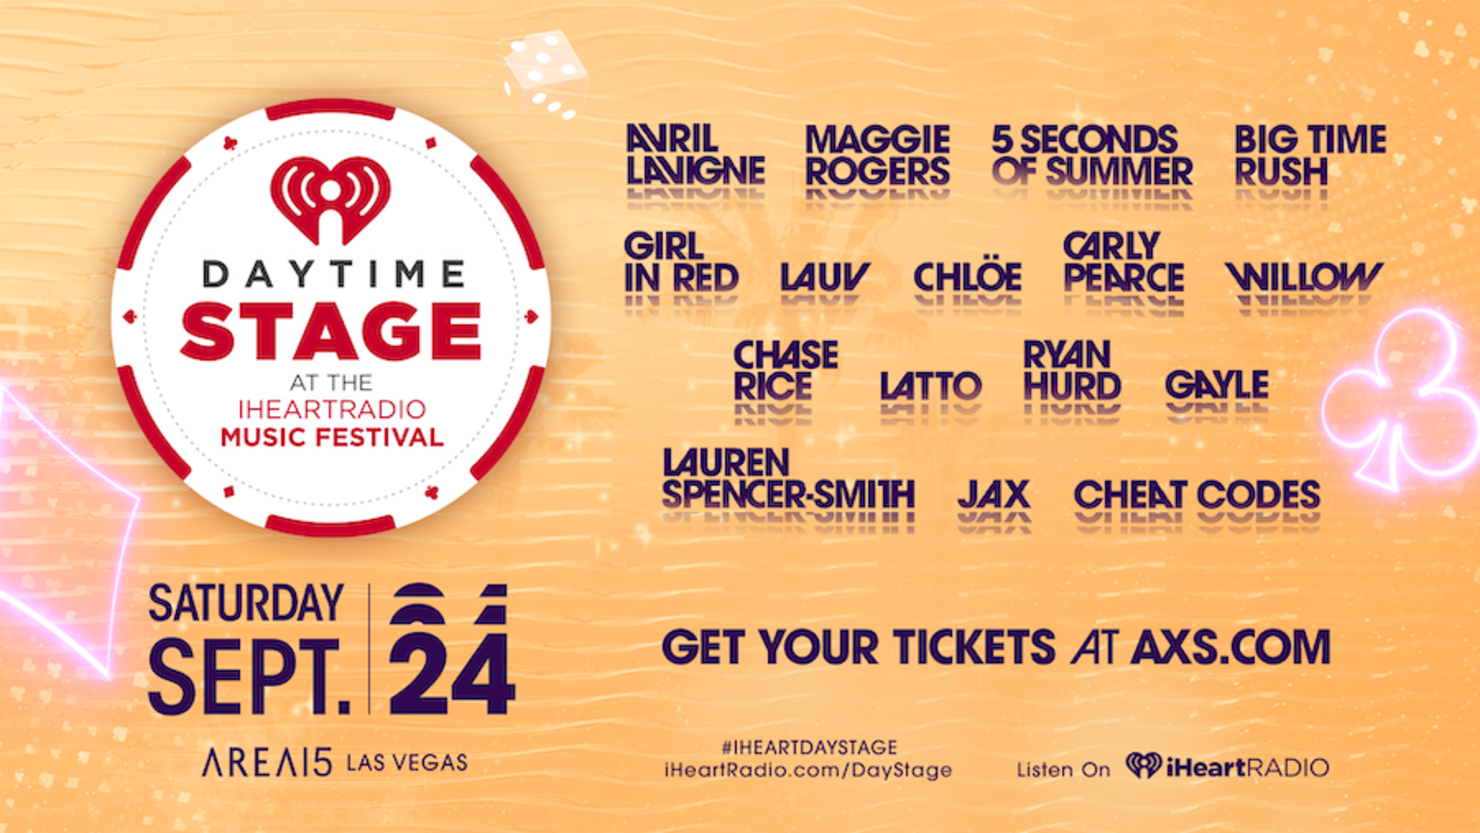 2022 Daytime Stage at the iHeartRadio Music Festival How To Watch iHeart